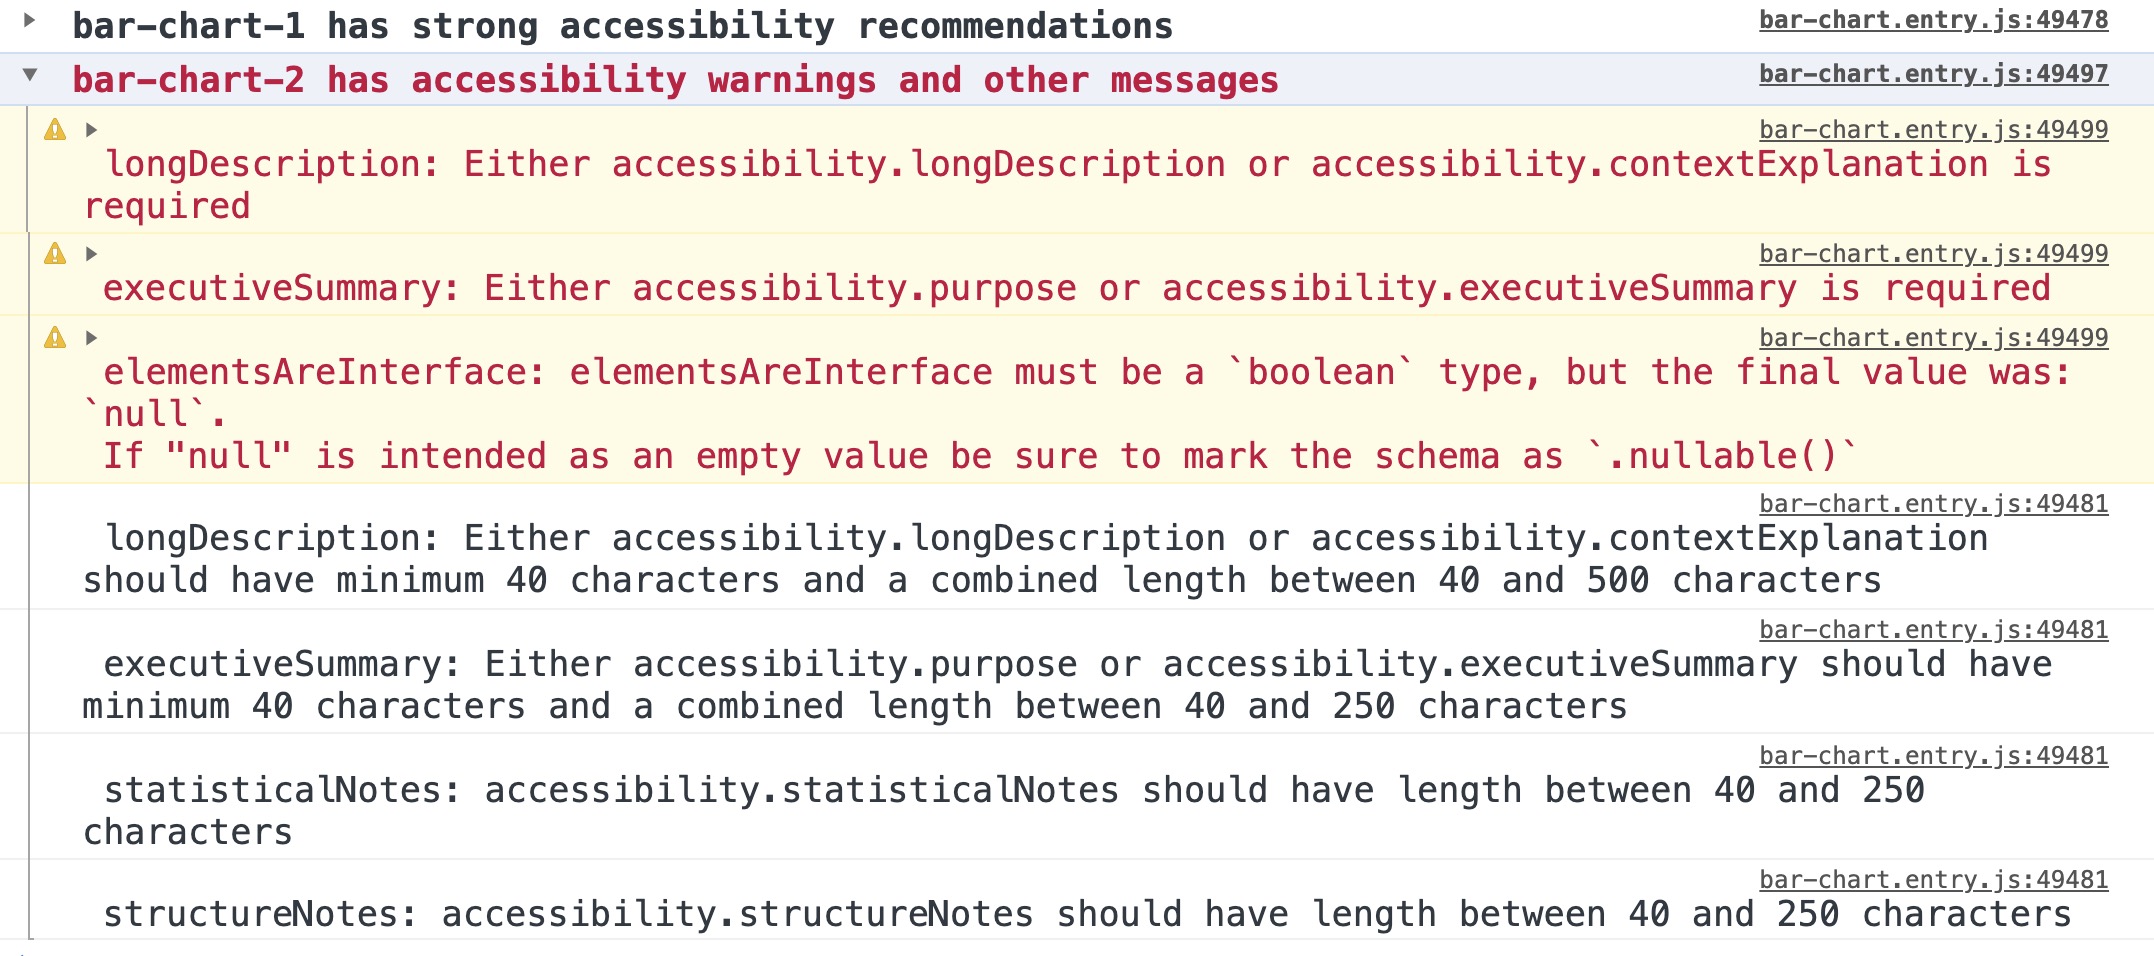 A view of a browser's JavaScript console, with multiple warnings and messages related to accessibility displayed.